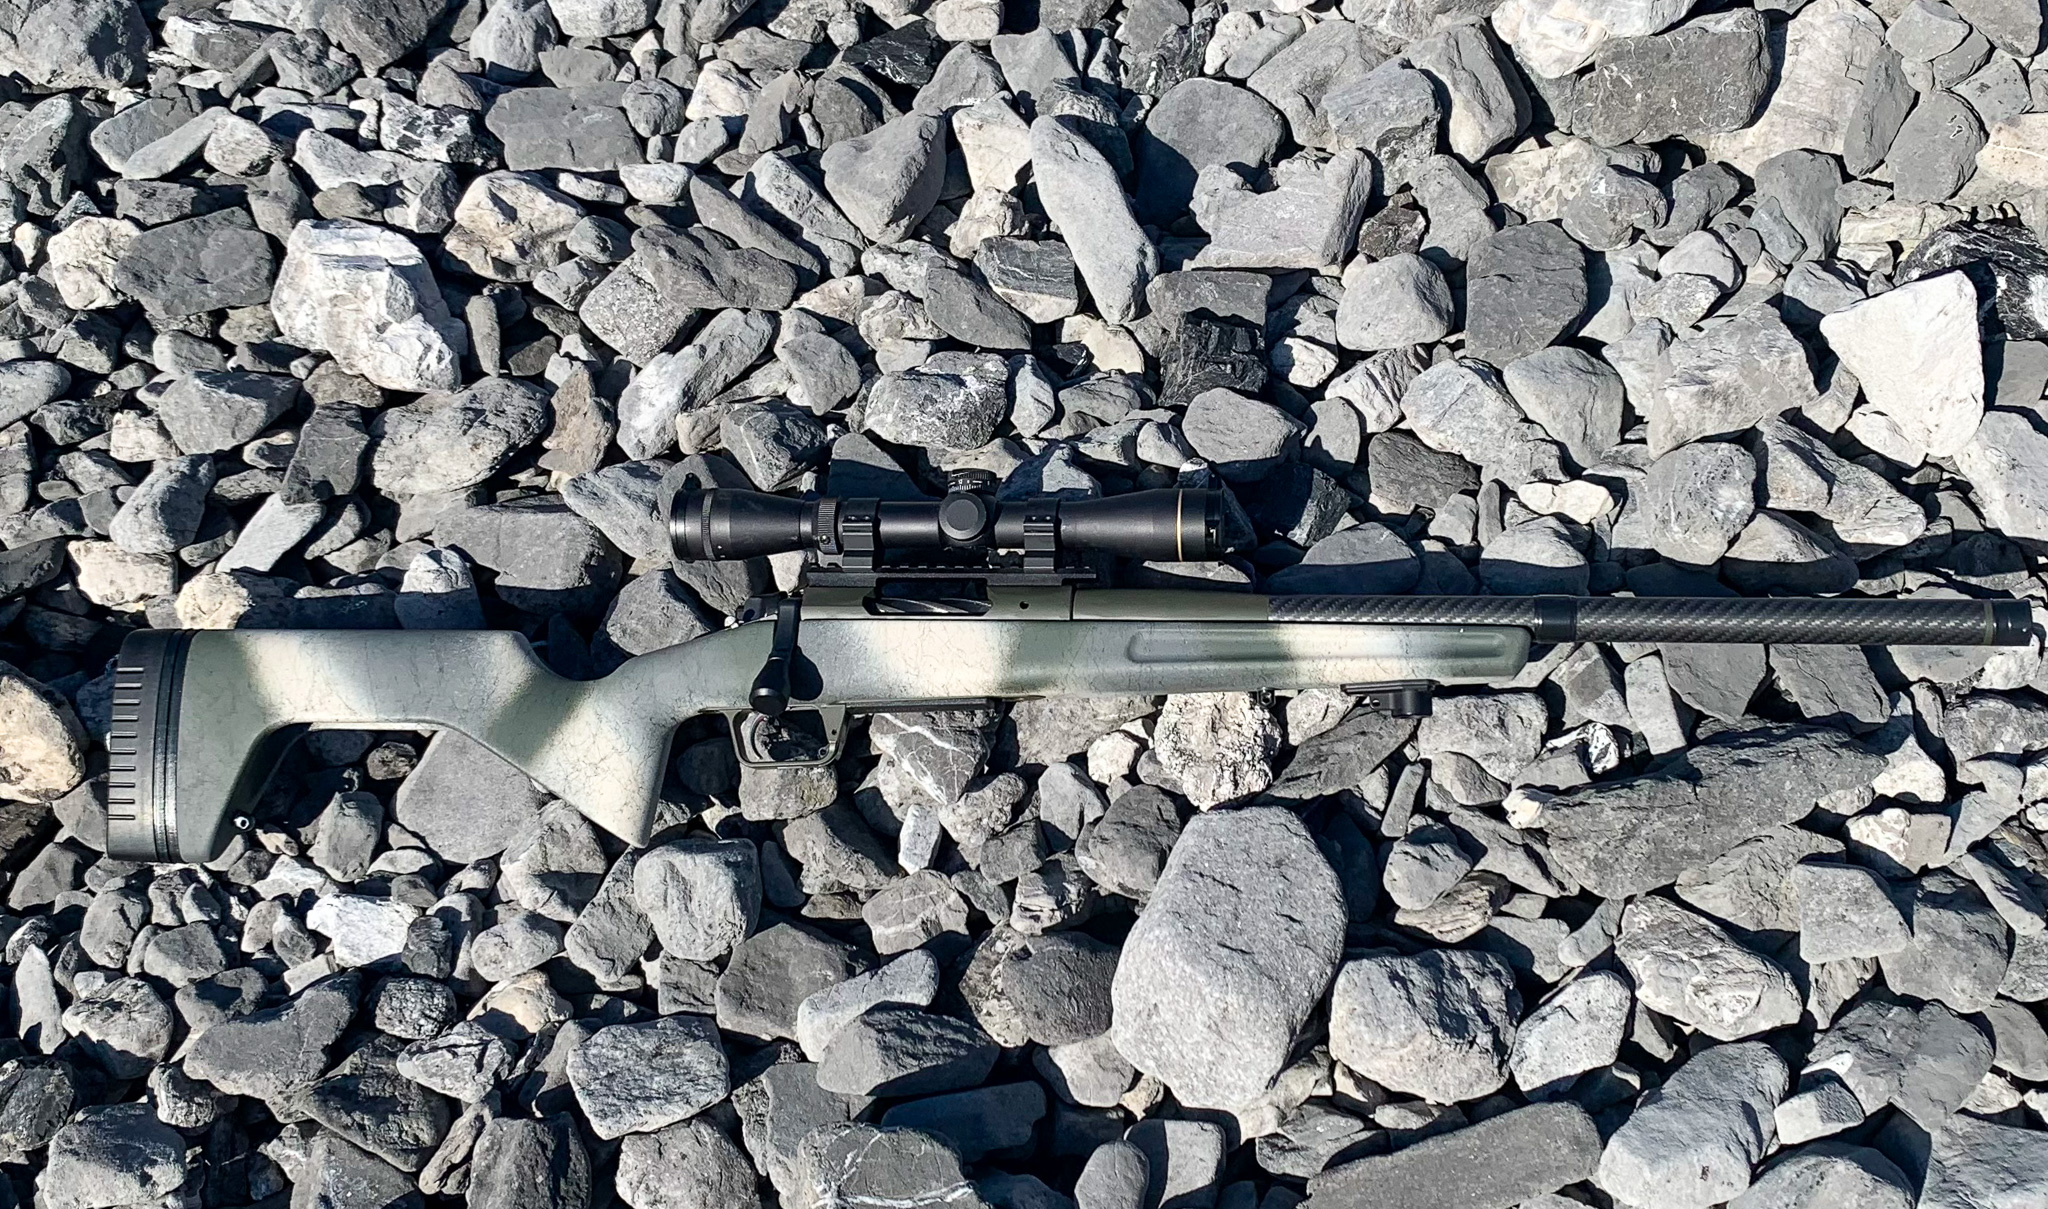 A sheep hunter's camo Springfield 2020 Redline chambered in 6.5 Creedmoor laid carefully on the rocks in the mountains.